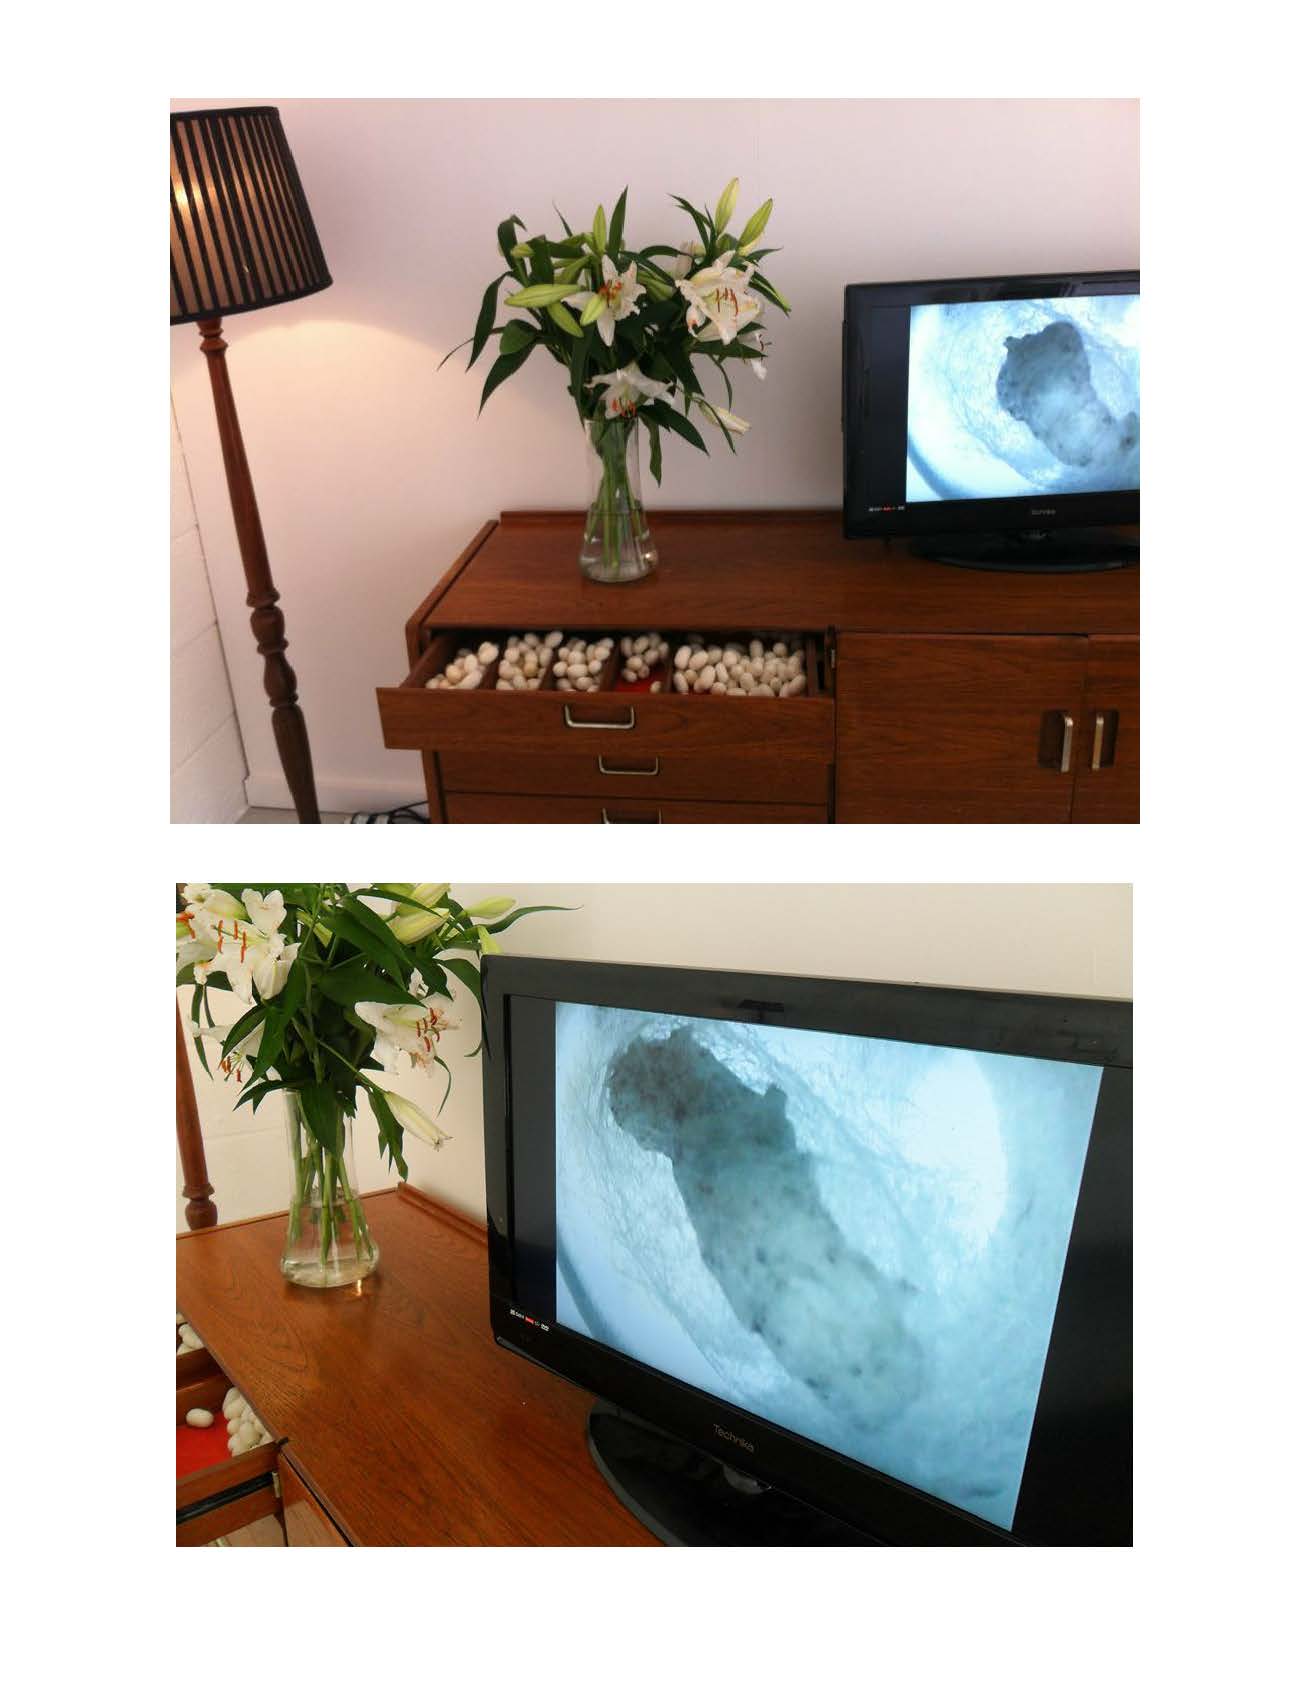 A wooden nightstand holding a TV with a drawer pulled open revealing more cocoons inside